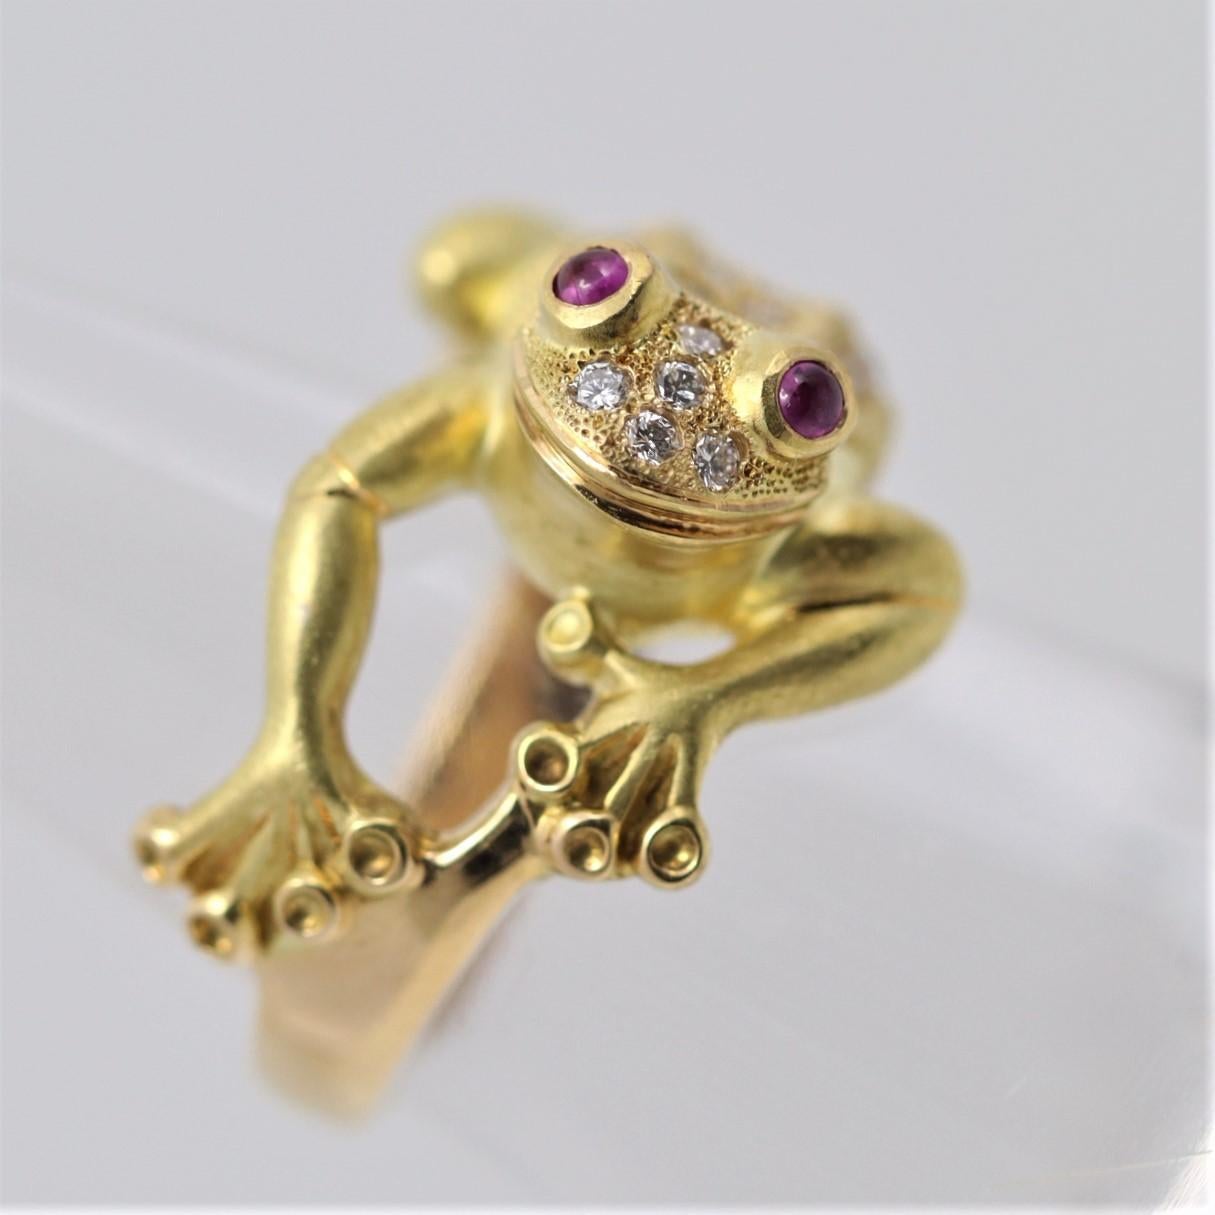 A whimsical and playful ring featuring a lifelike frog studded with diamonds and ruby eyes. The stretched frog features 0.46 carats of round brilliant-cut diamonds set on its back, along with two ruby cabochons as its eyes. Its body is crafted in